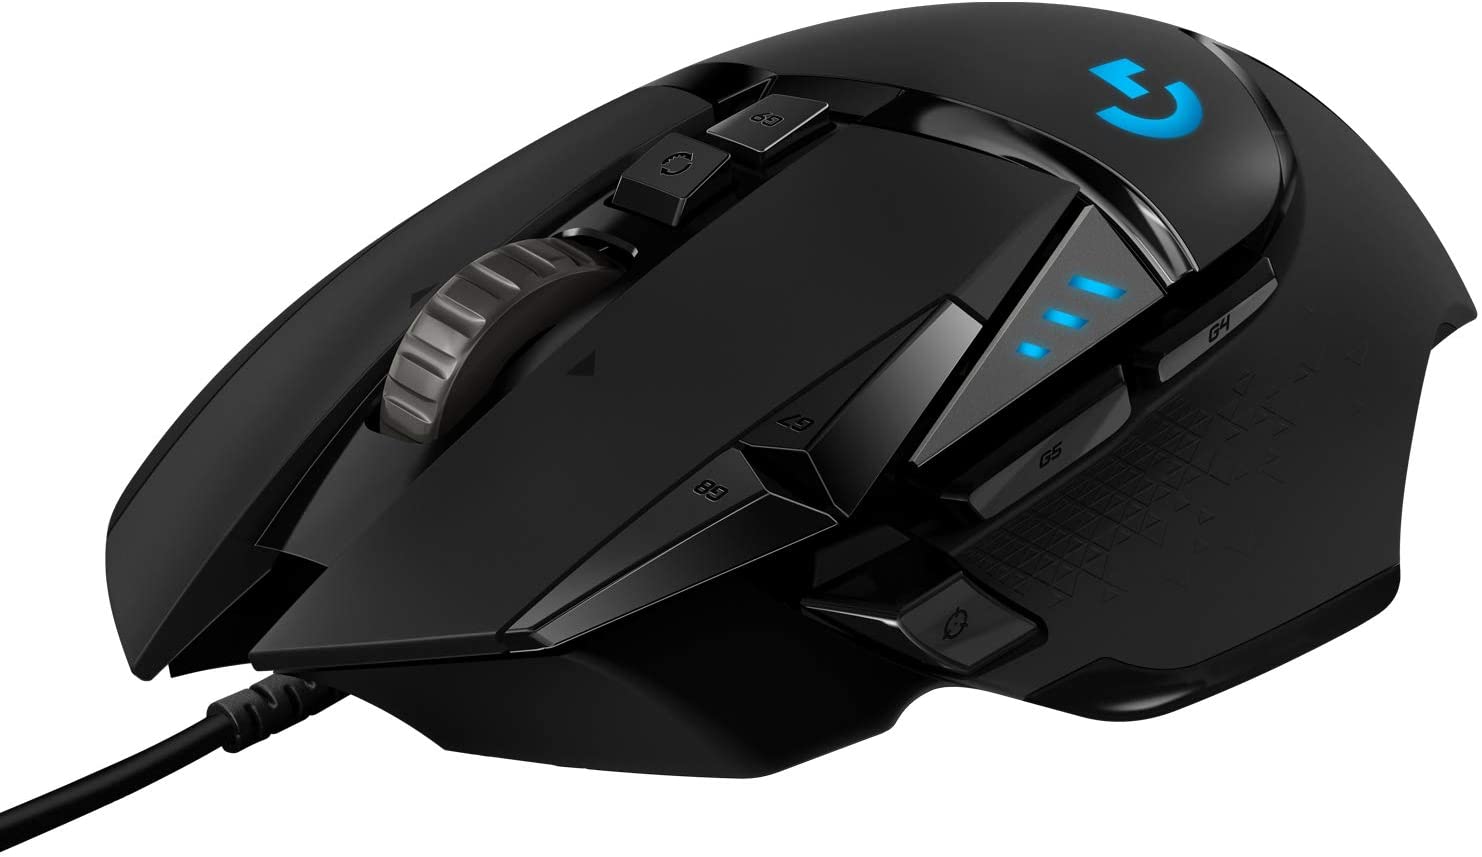 Logitech G502 HERO Wired Gaming Mouse w/ RGB Lighting $33.41 + Free Shipping